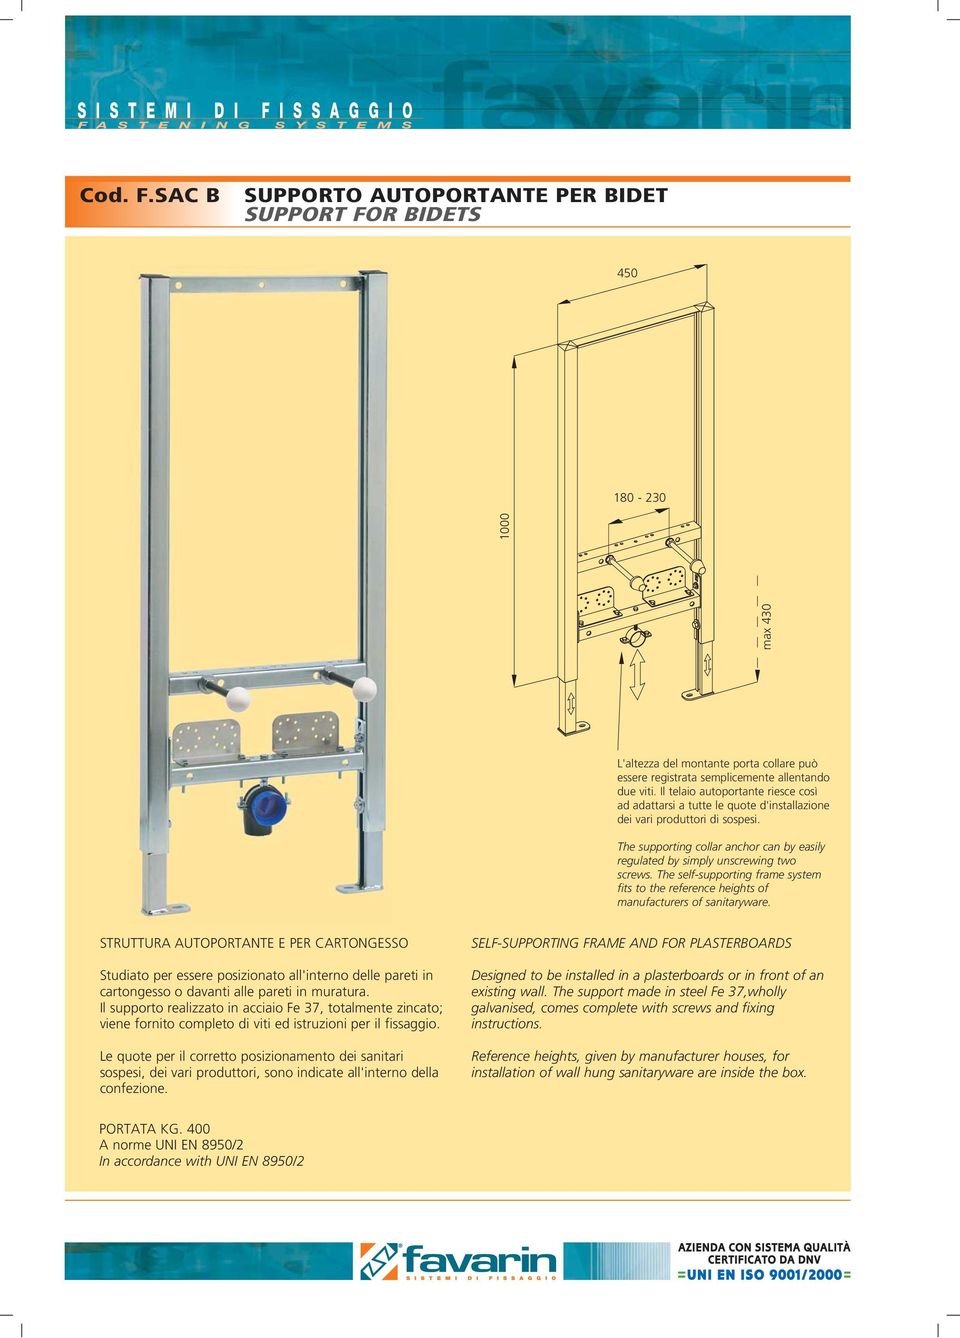 The self-supporting frame system fits to the reference heights of manufacturers of sanitaryware.